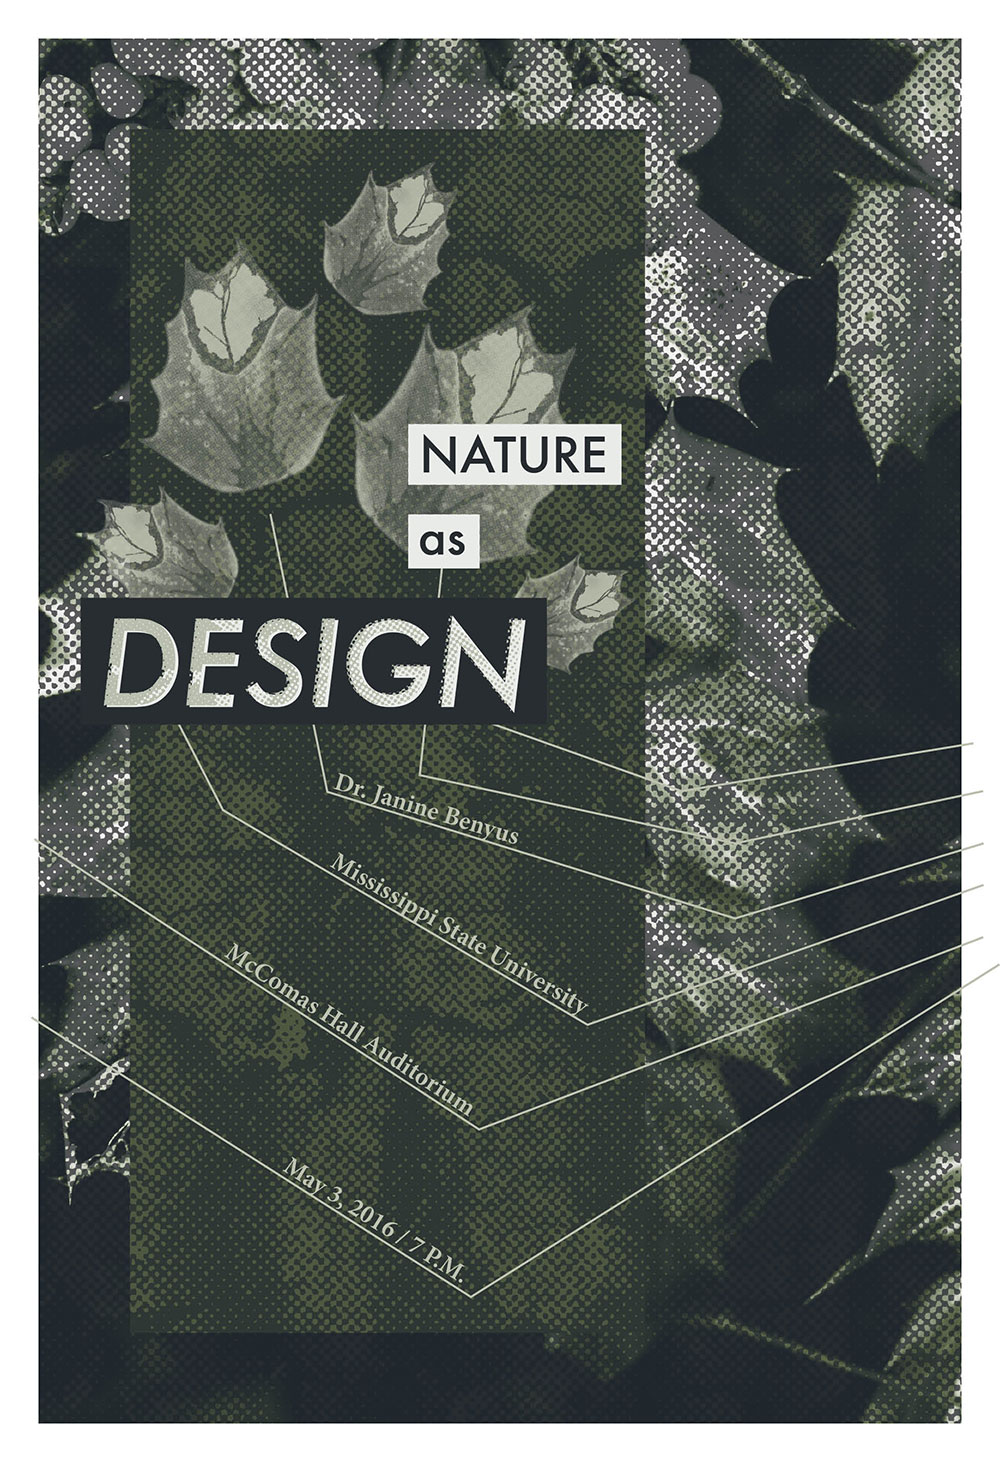 Nature as design poster created out of several leaves with bitmapped circular leaves in the background. 